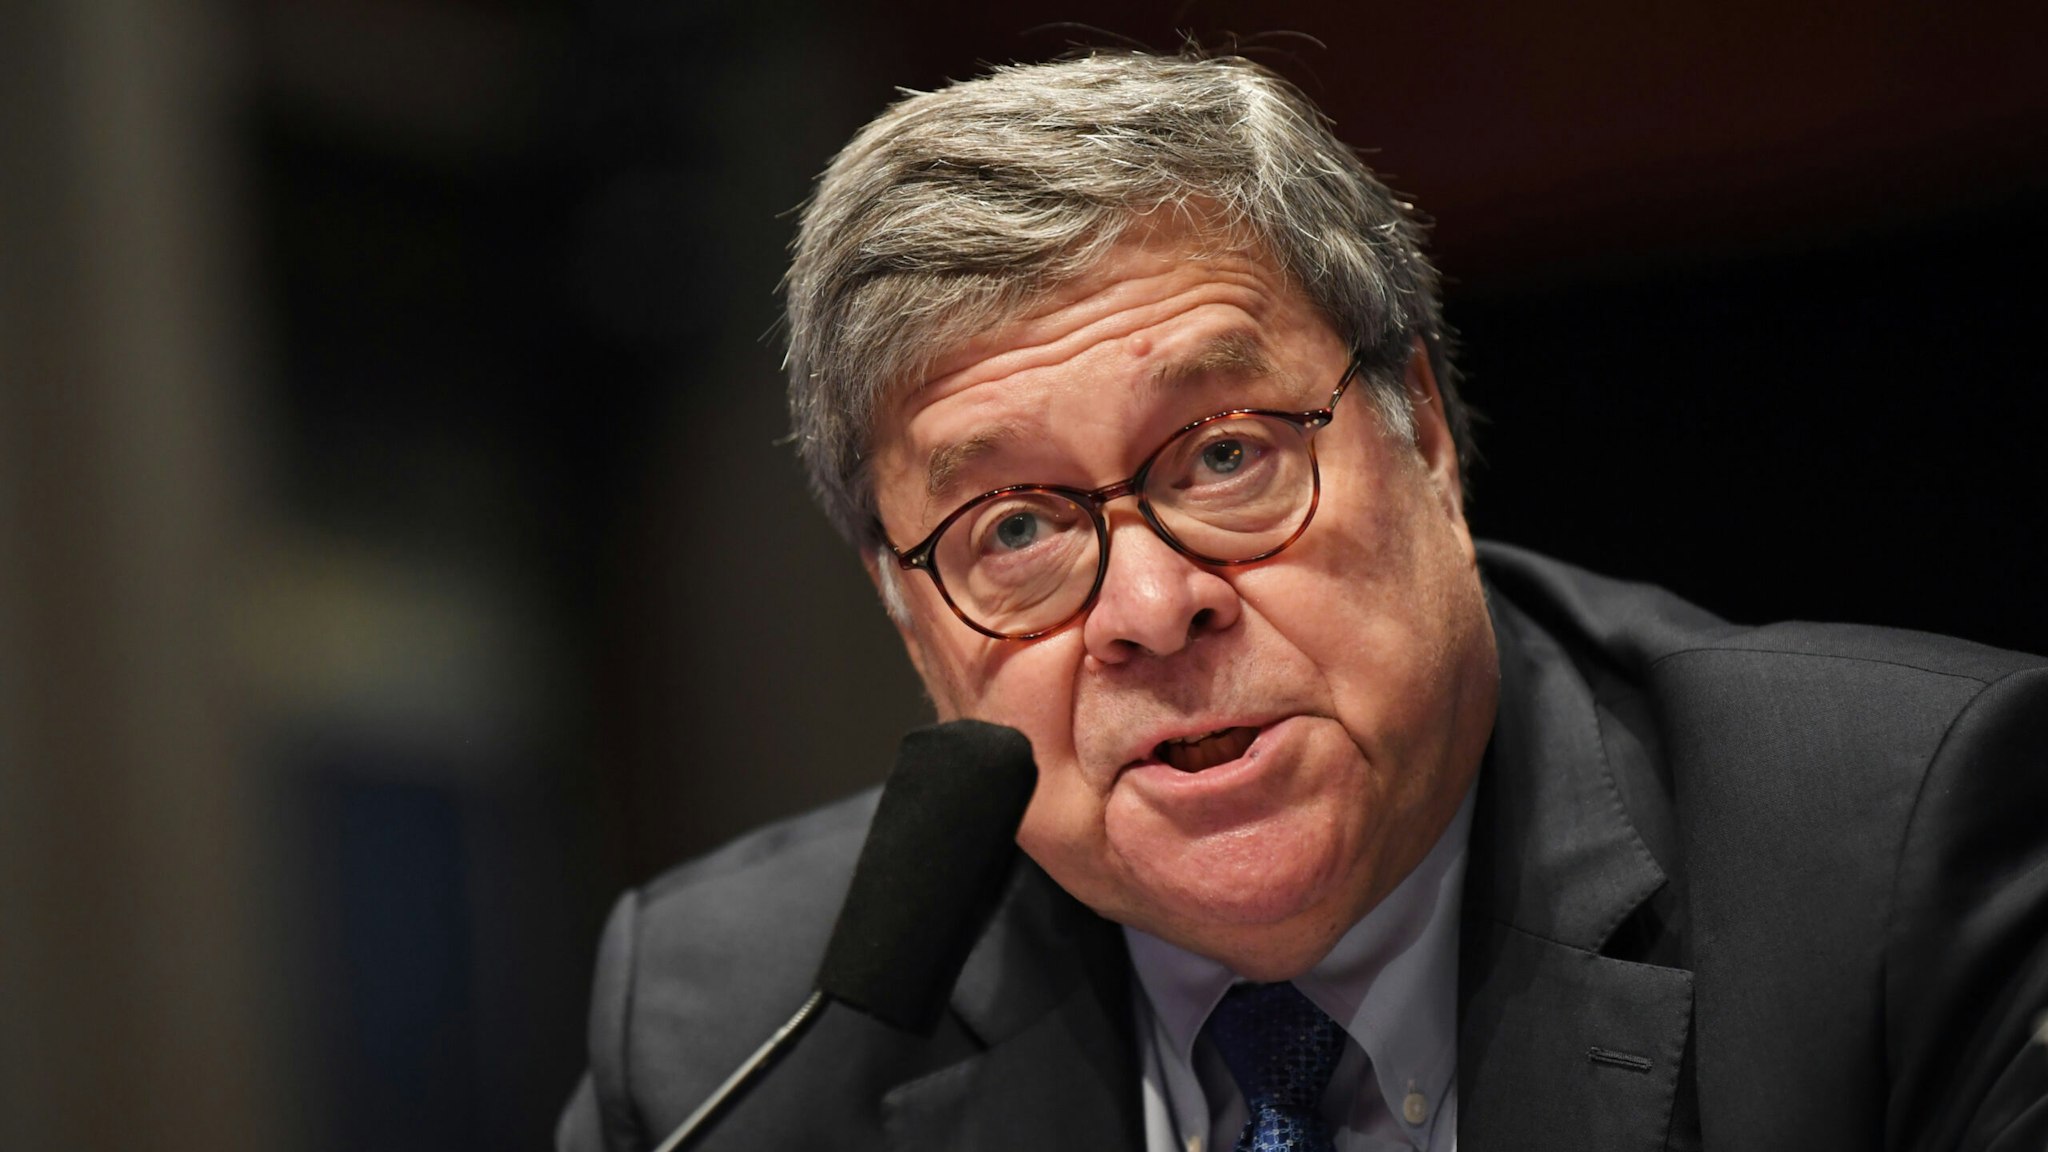 Attorney General William Barr appears before the House Judiciary Committee on July 28, 2020 on Capitol Hill in Washington D.C.